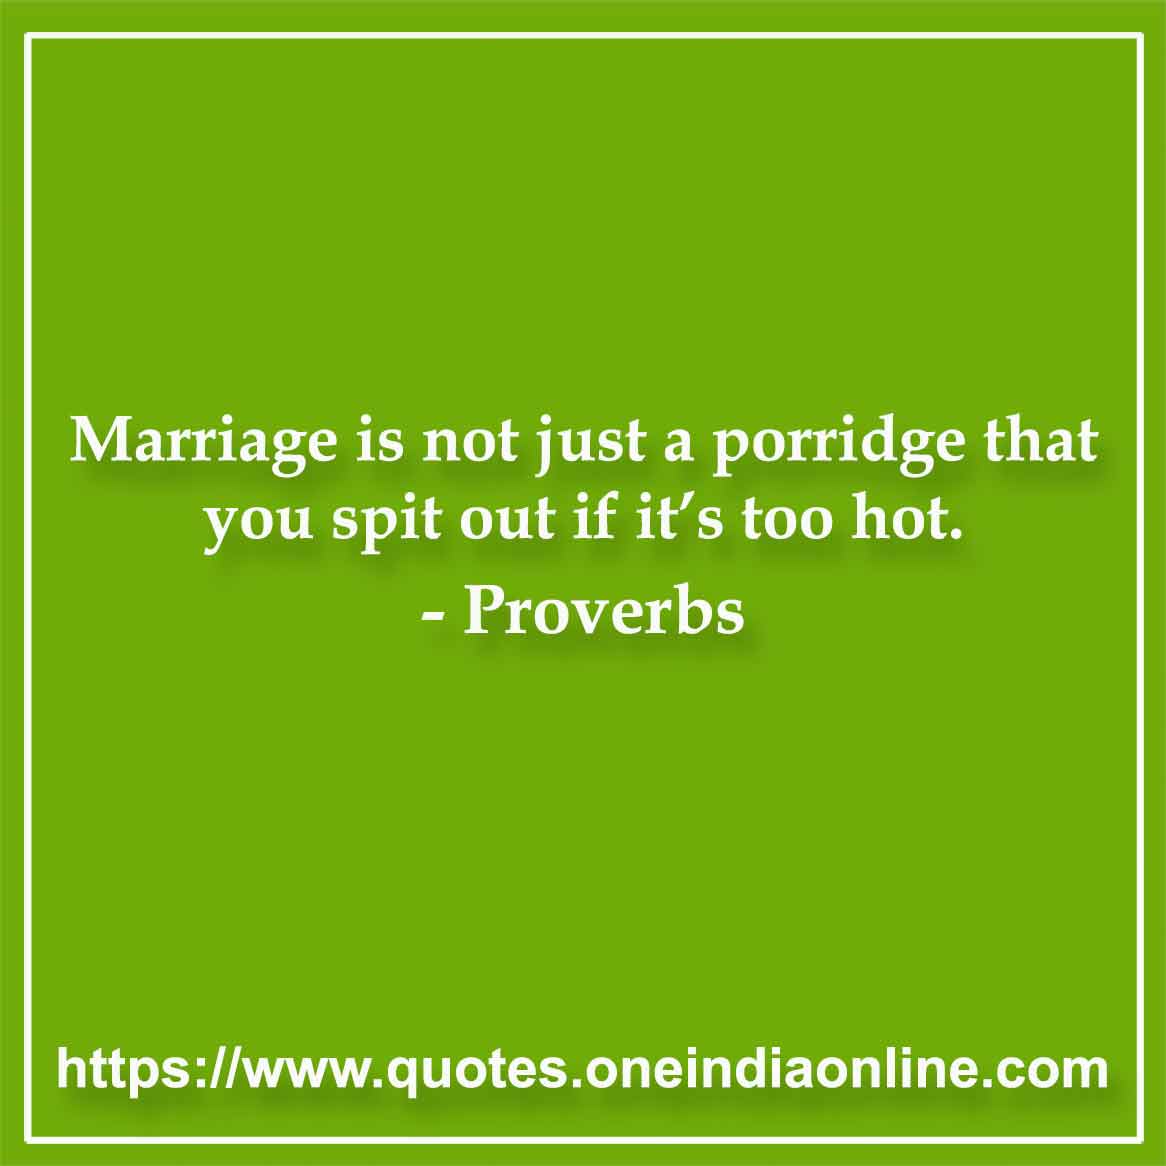 Marriage is not just a porridge that you spit out if it’s too hot.

- 